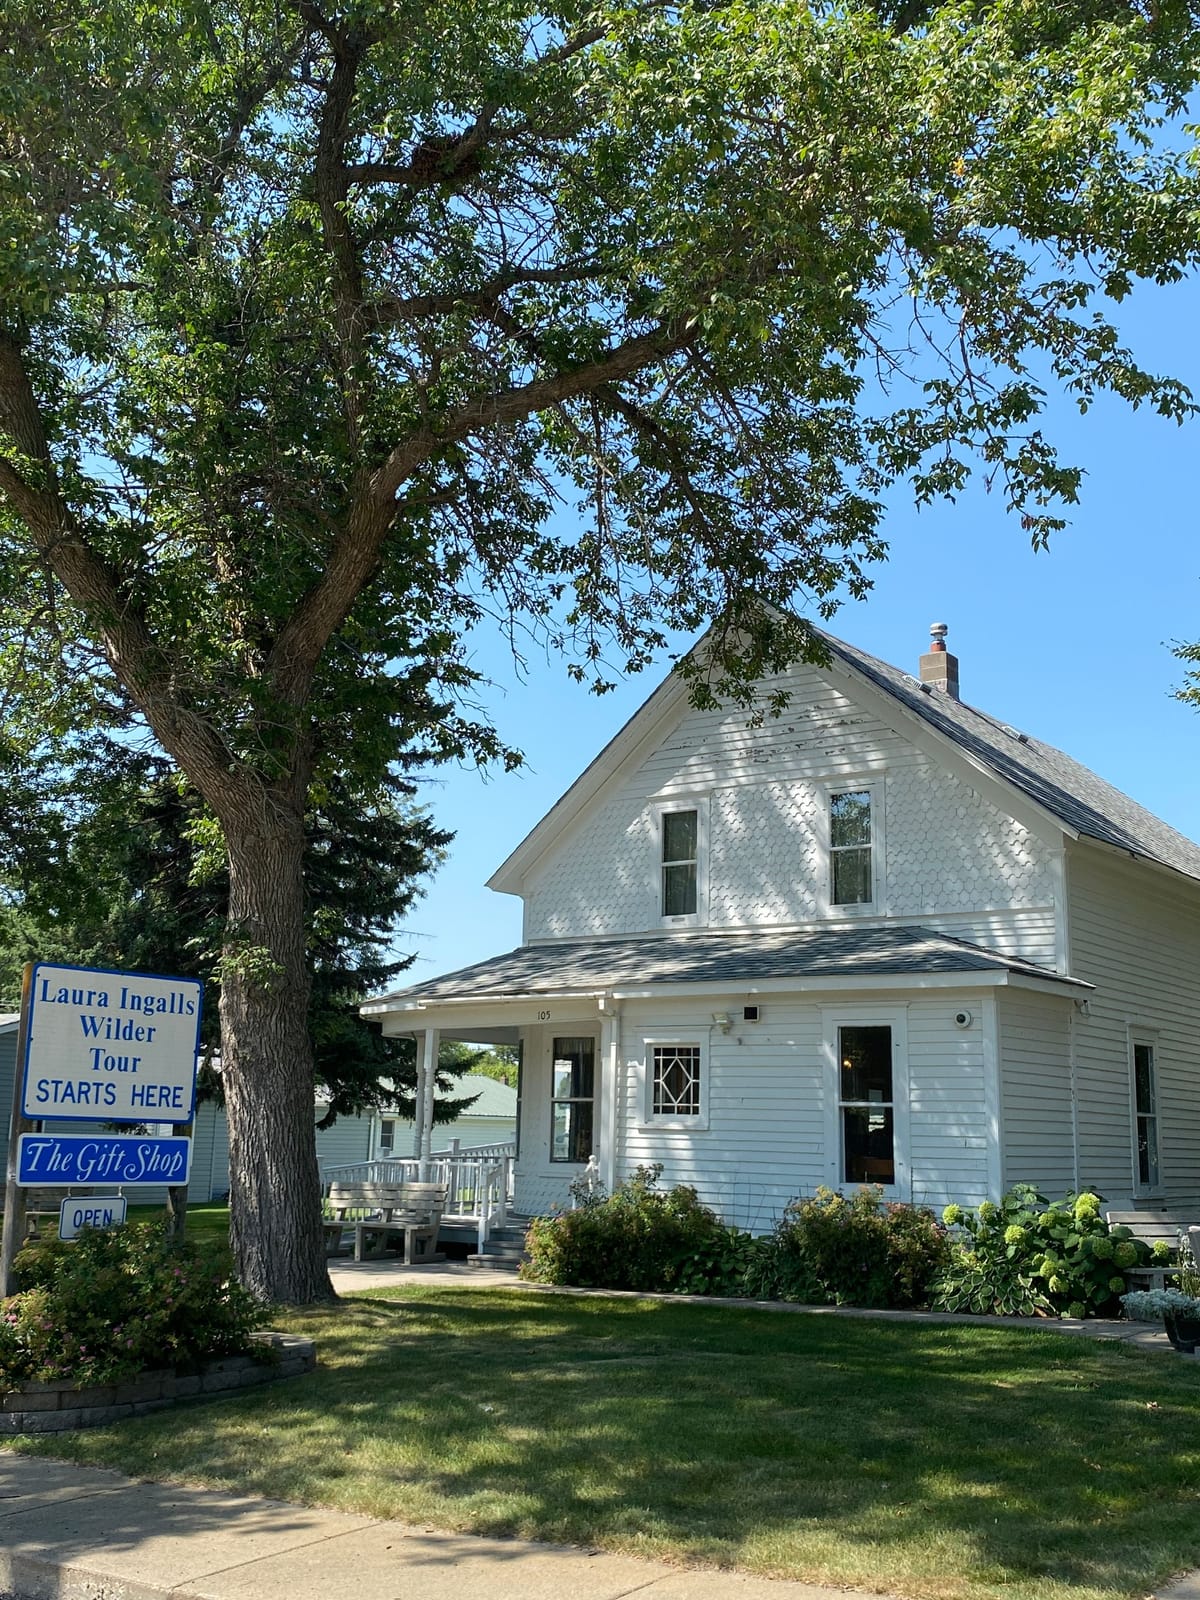 Laura Ingalls Wilder Home Review